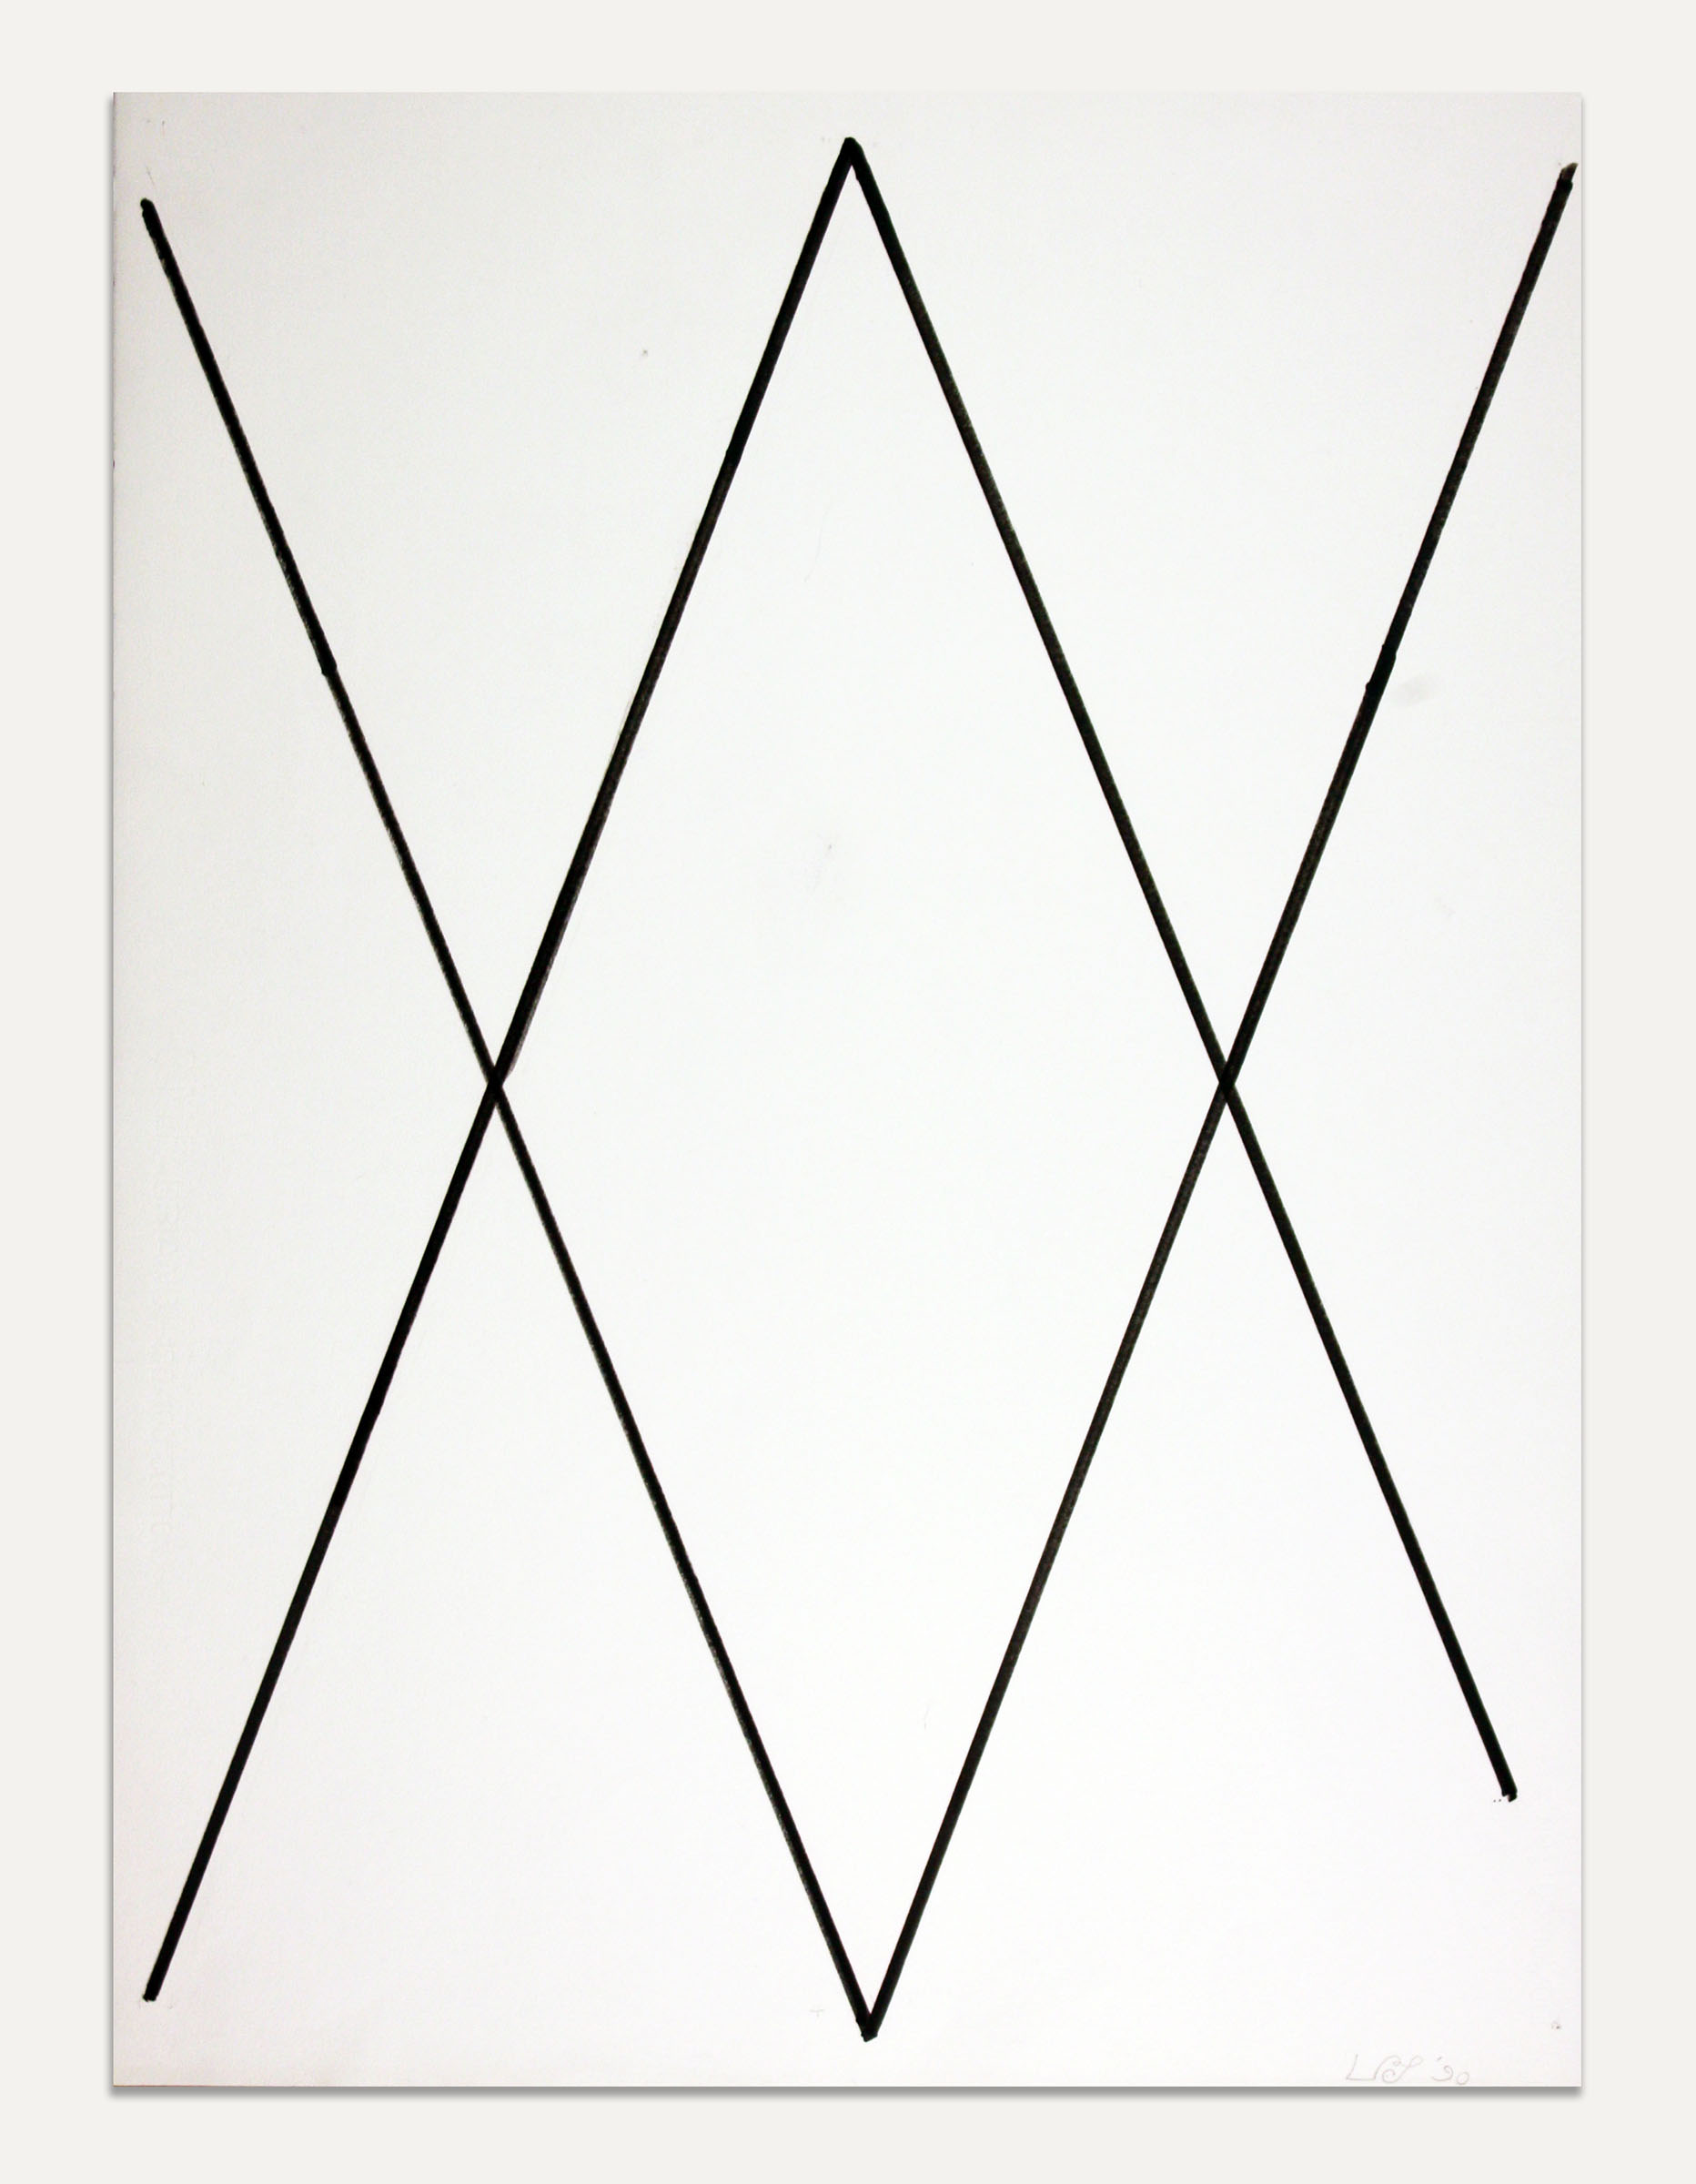 untitled, 1990. Paper and marker on paper. Sheet Size: 29 7/8 x 22 1/8 in.